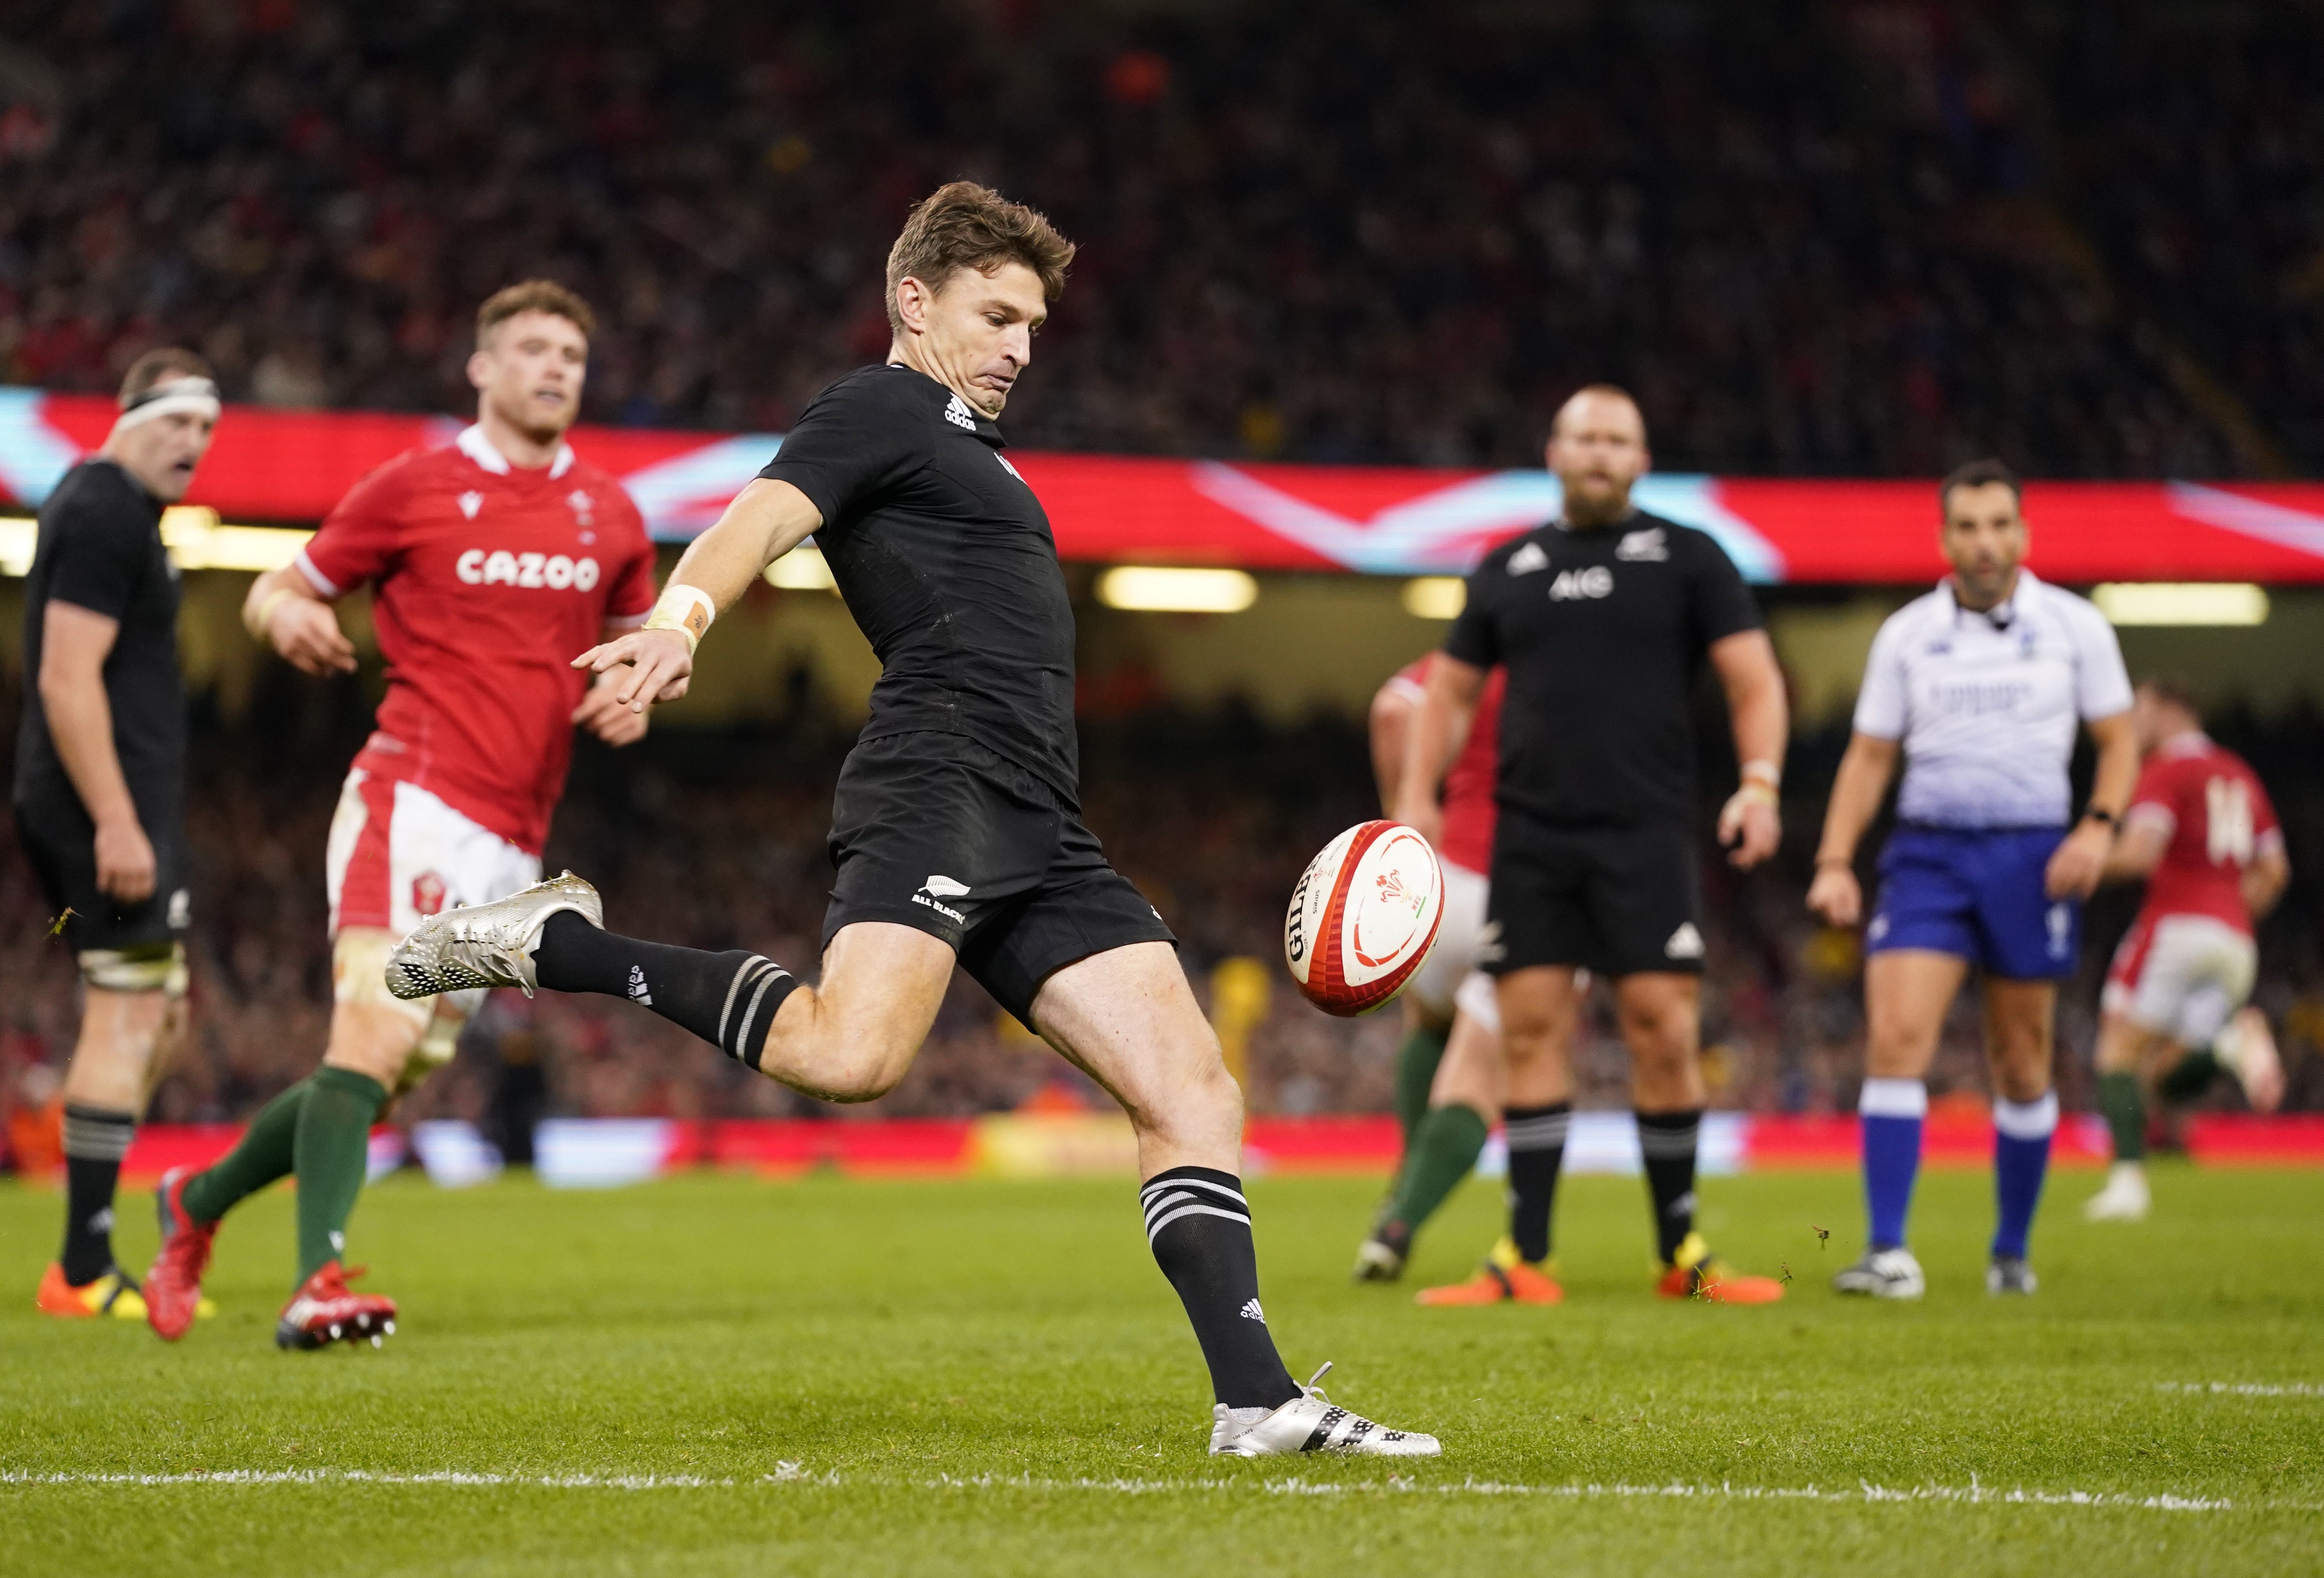 The All Blacks stormed to a 54-16 victory in Wales (David Davies/PA)